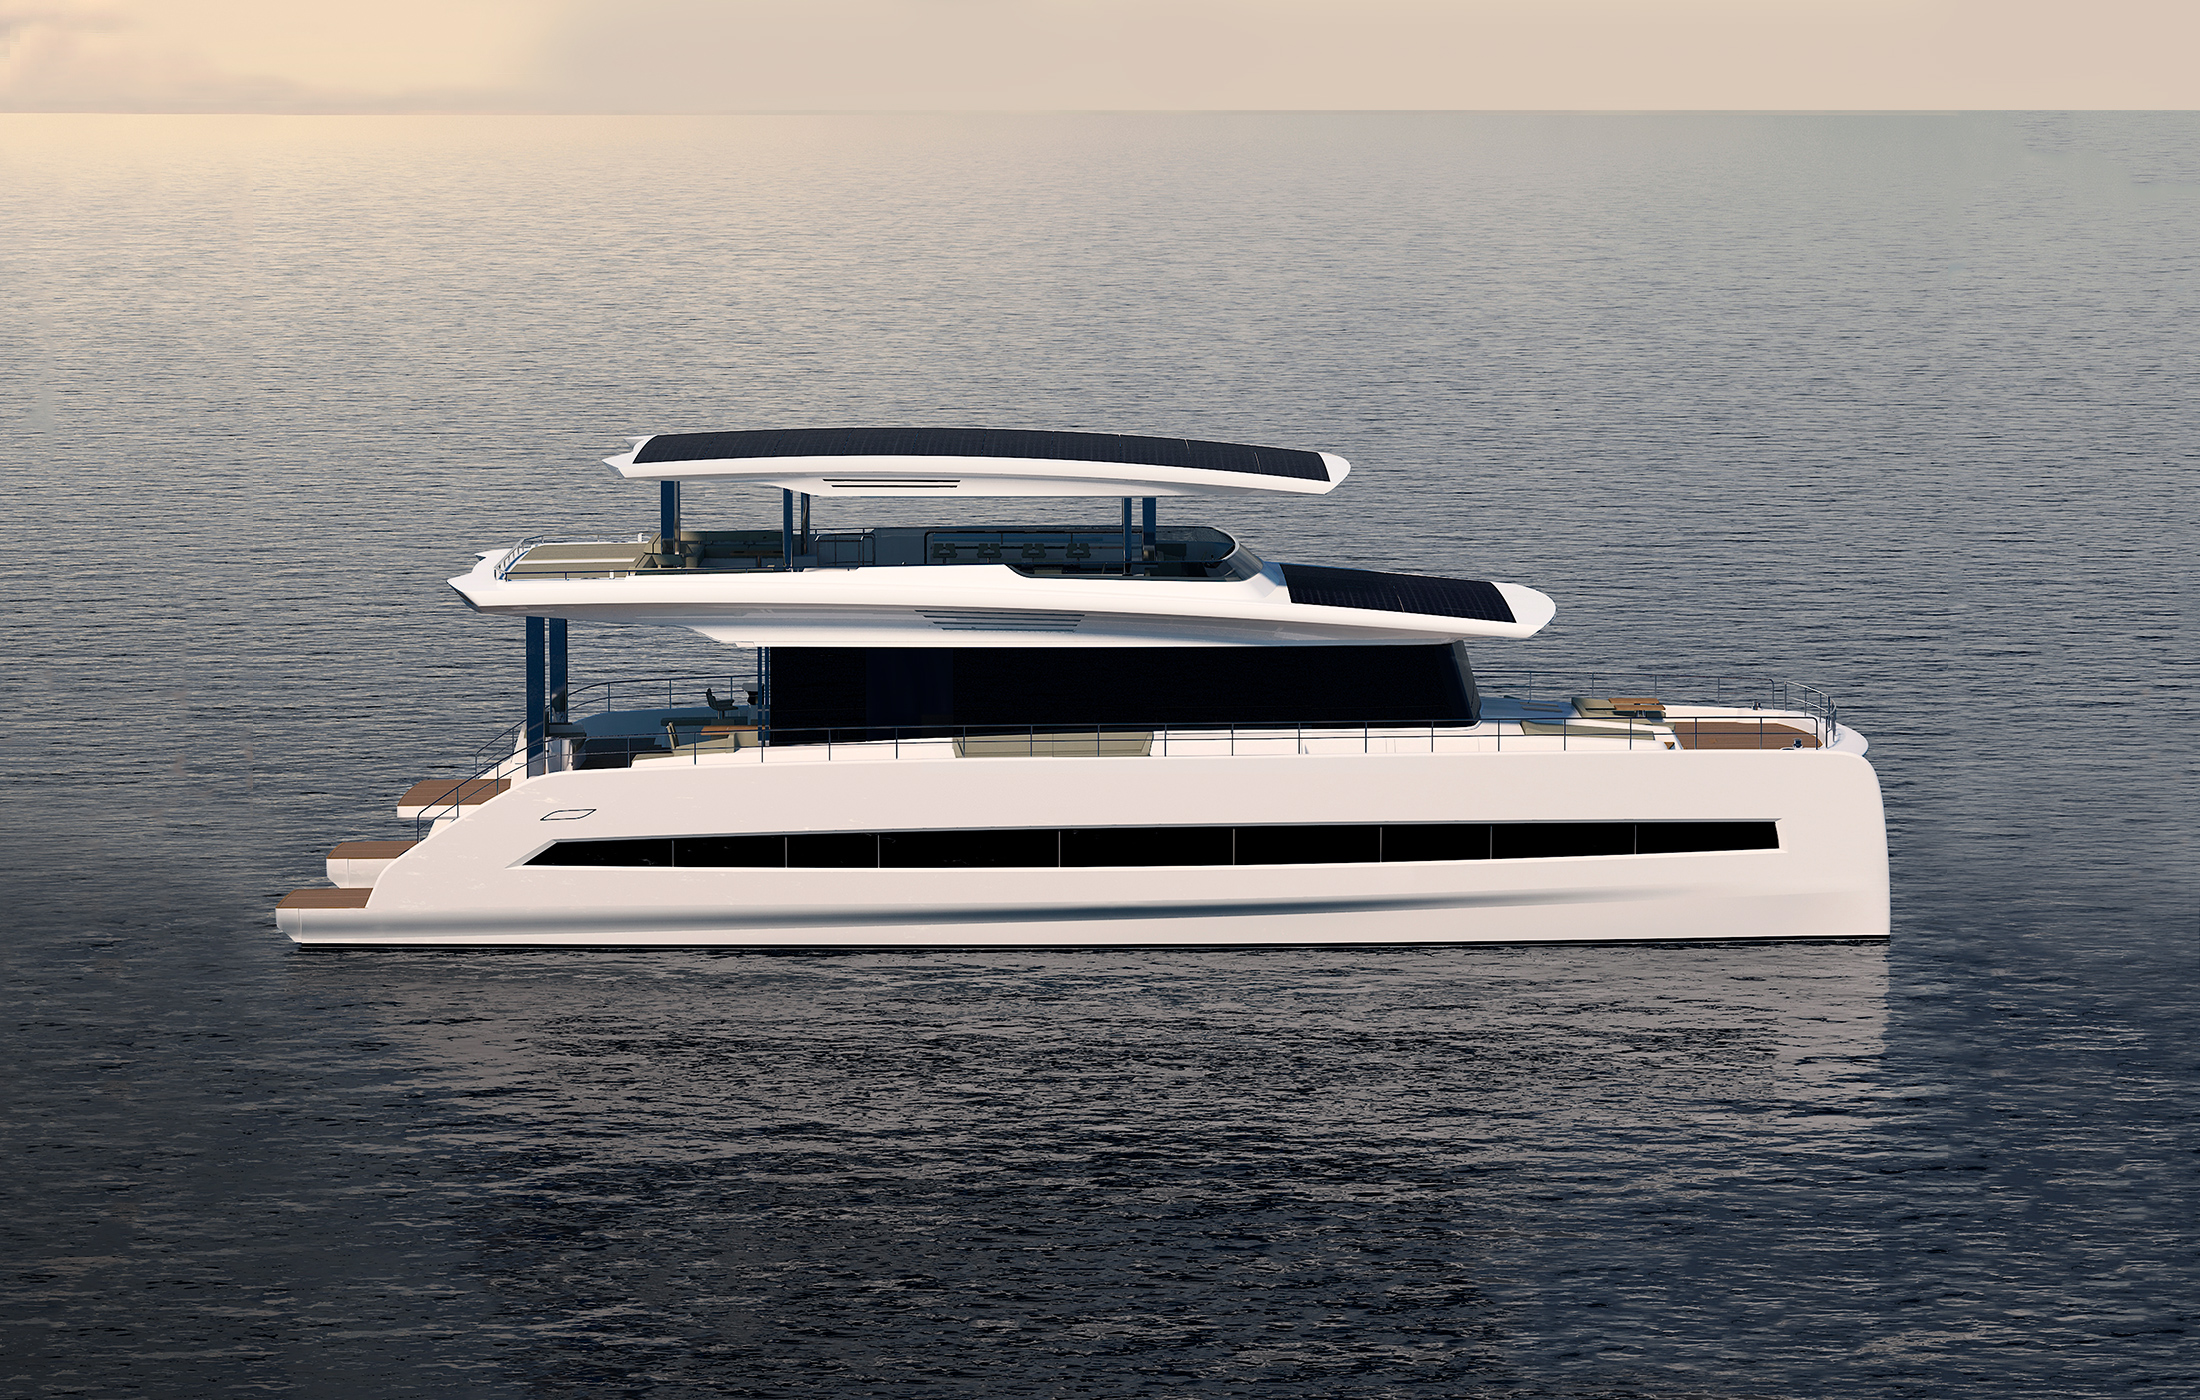 80 ft yacht with solar panels on the roof